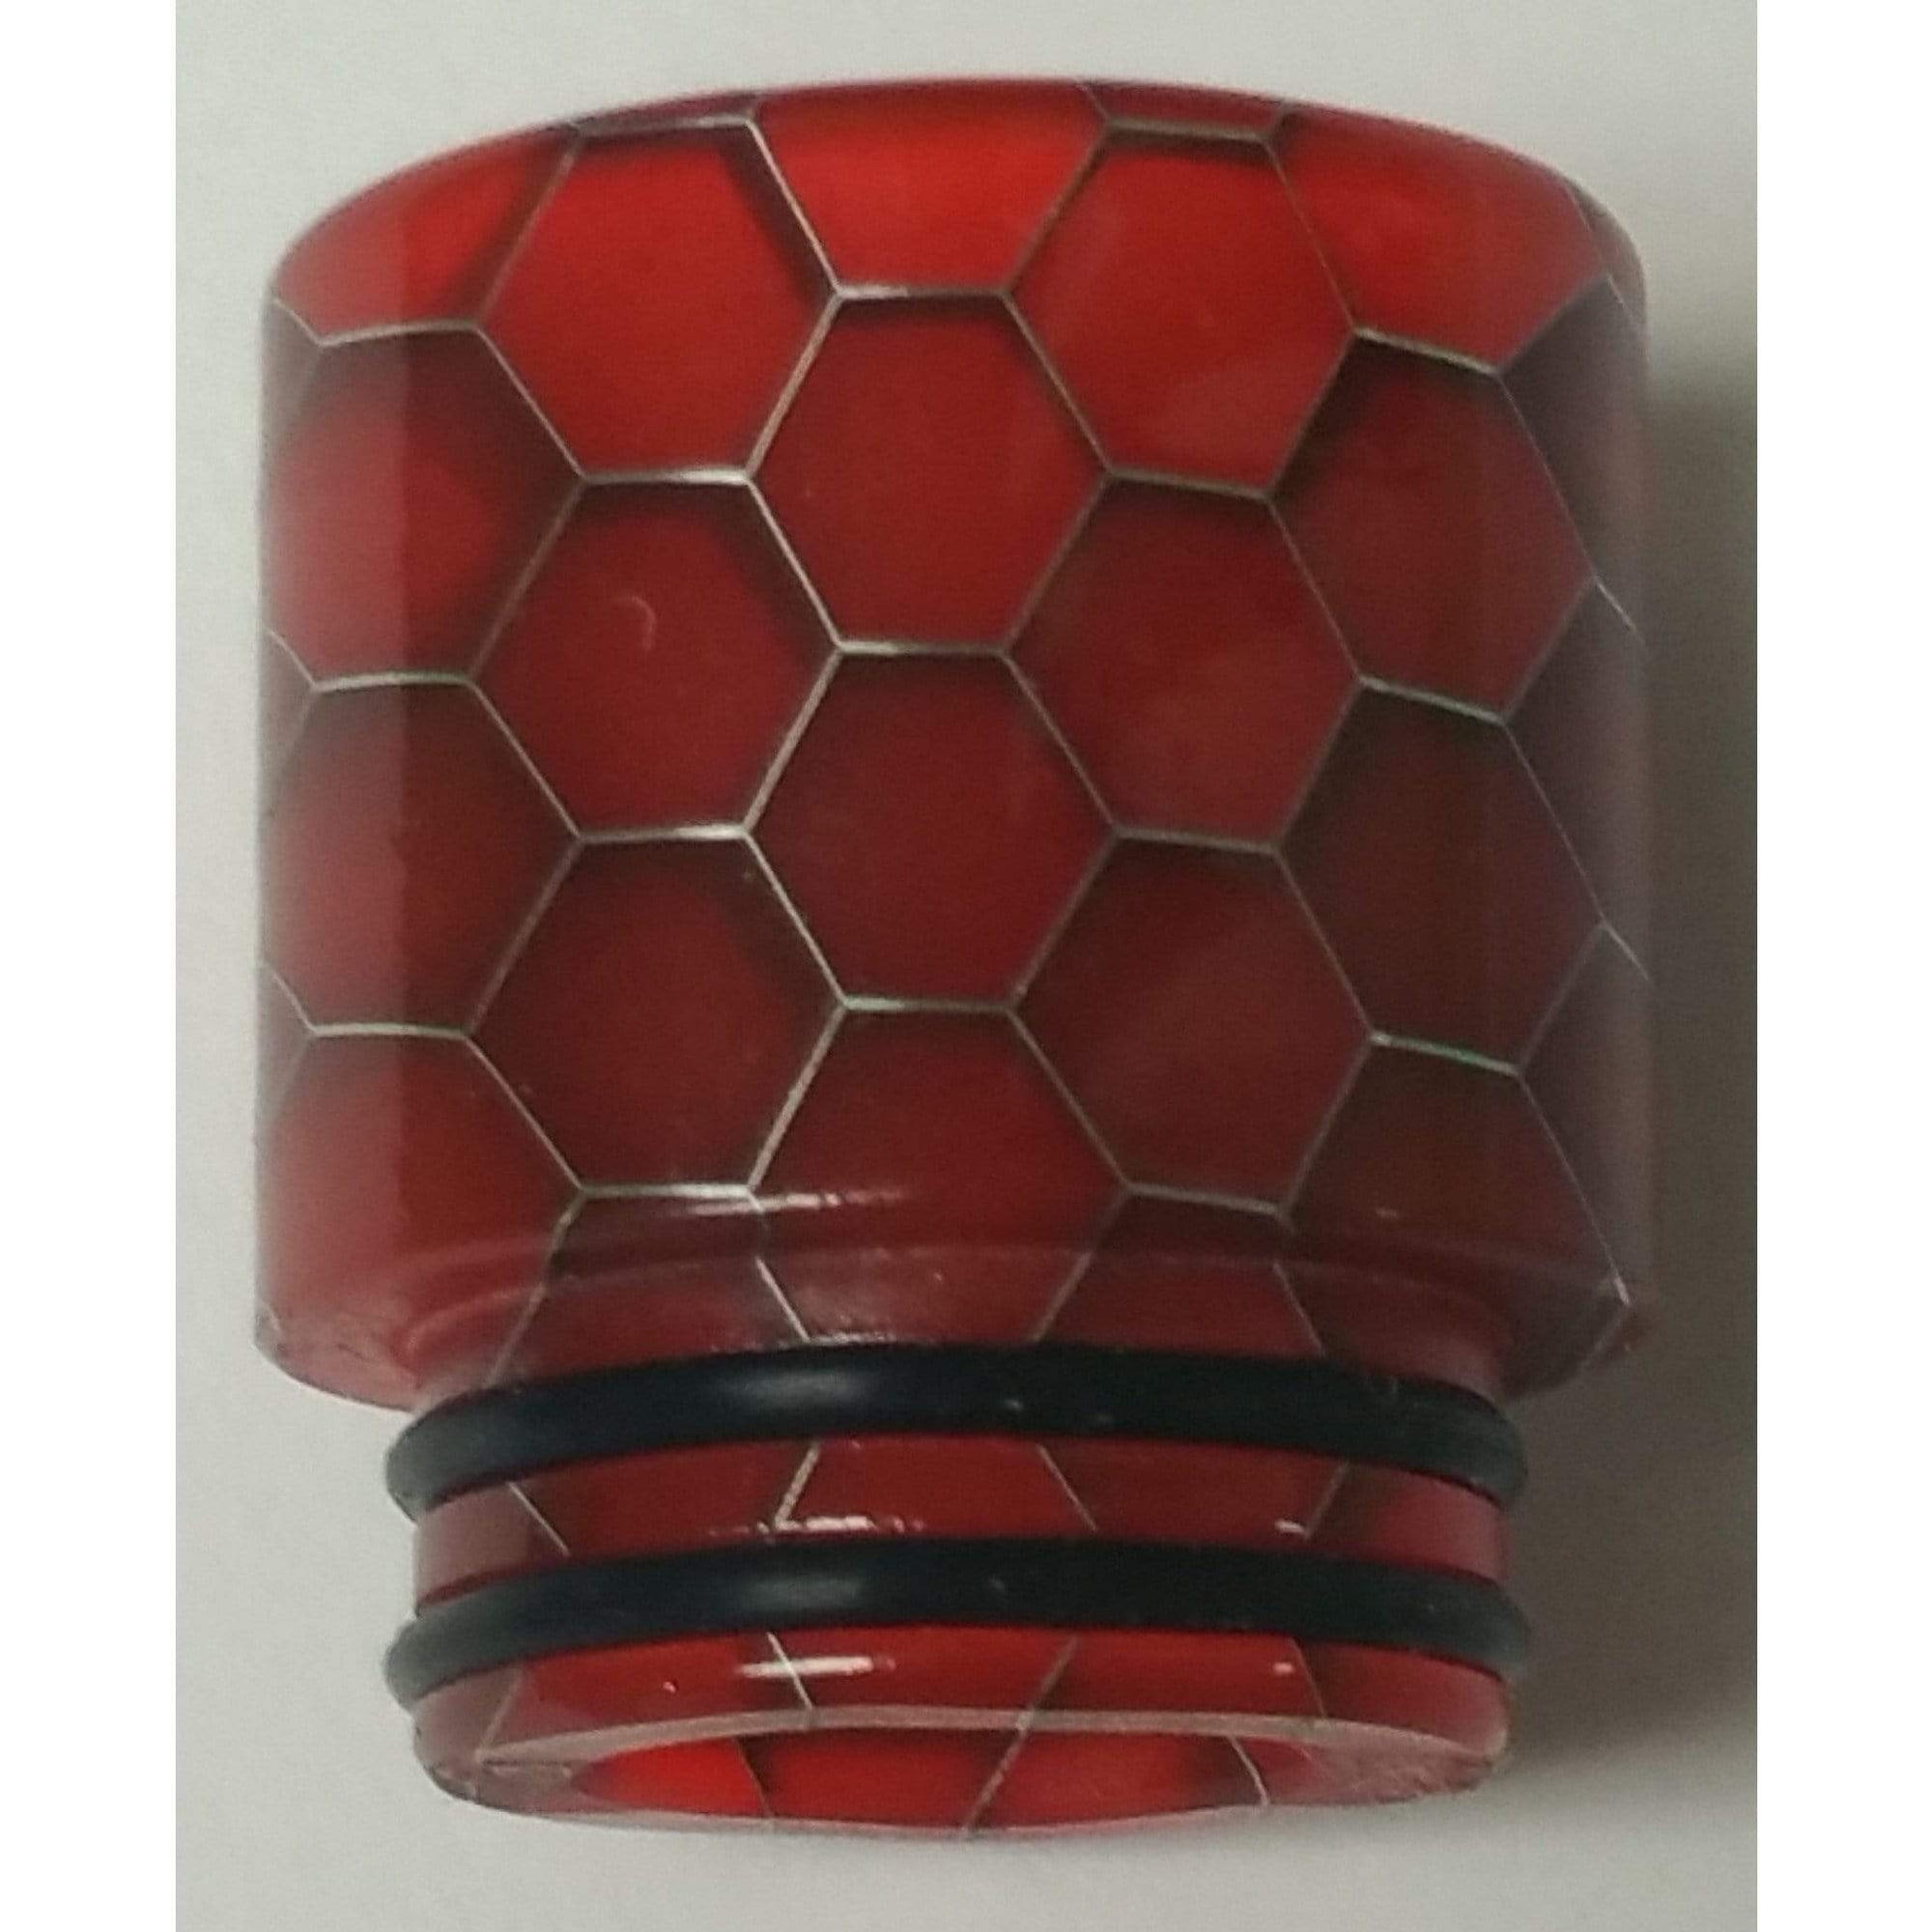 Resin Hive 810 Drip Tip Short Red Drip Tips